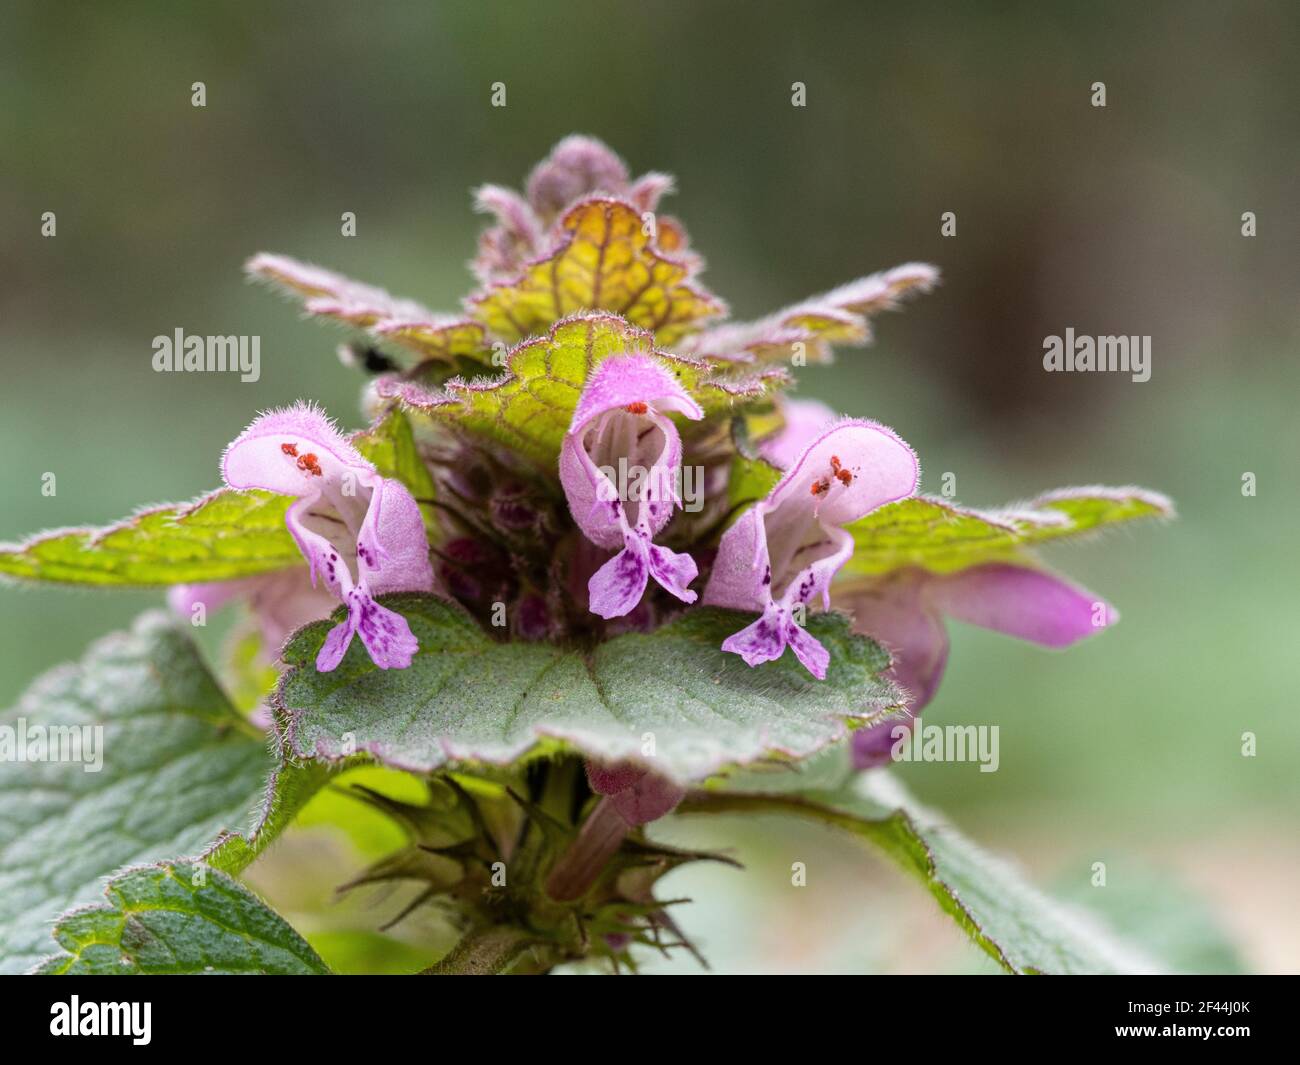 A close up of the pink hooded flowers of the red dead nettle Lamium purpureum Stock Photo